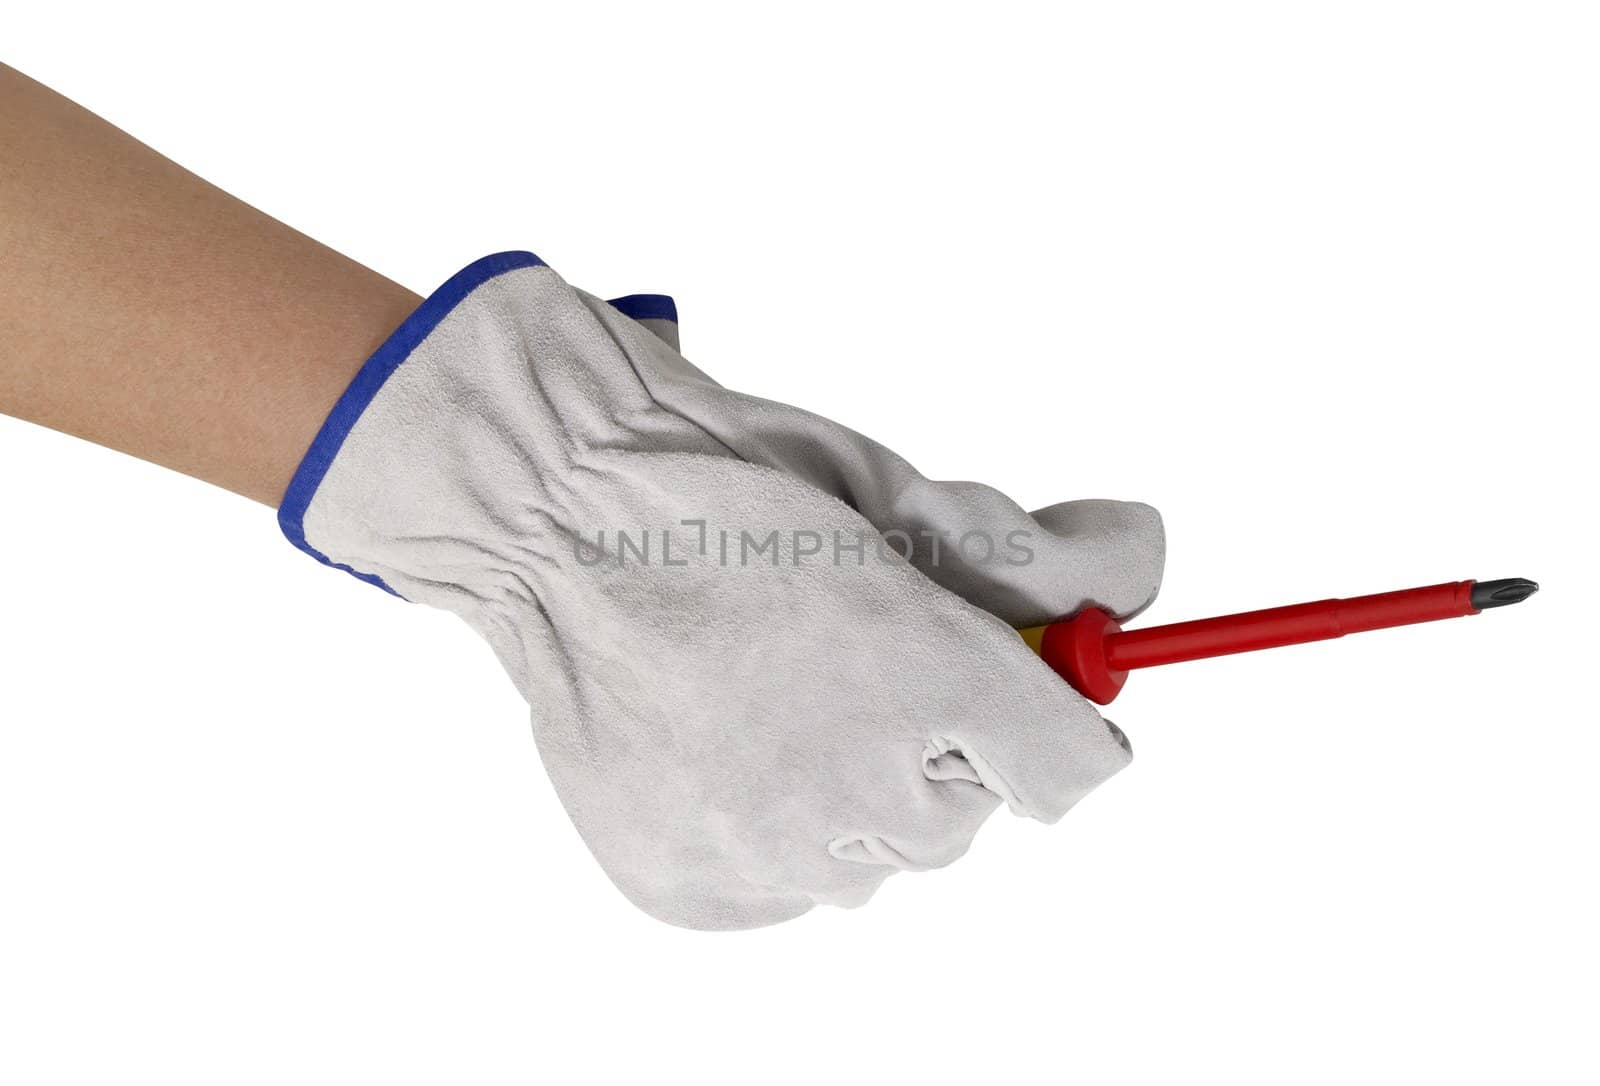 hand gloved with a light grey working glove holding a screwdriver.Studio shot in white back